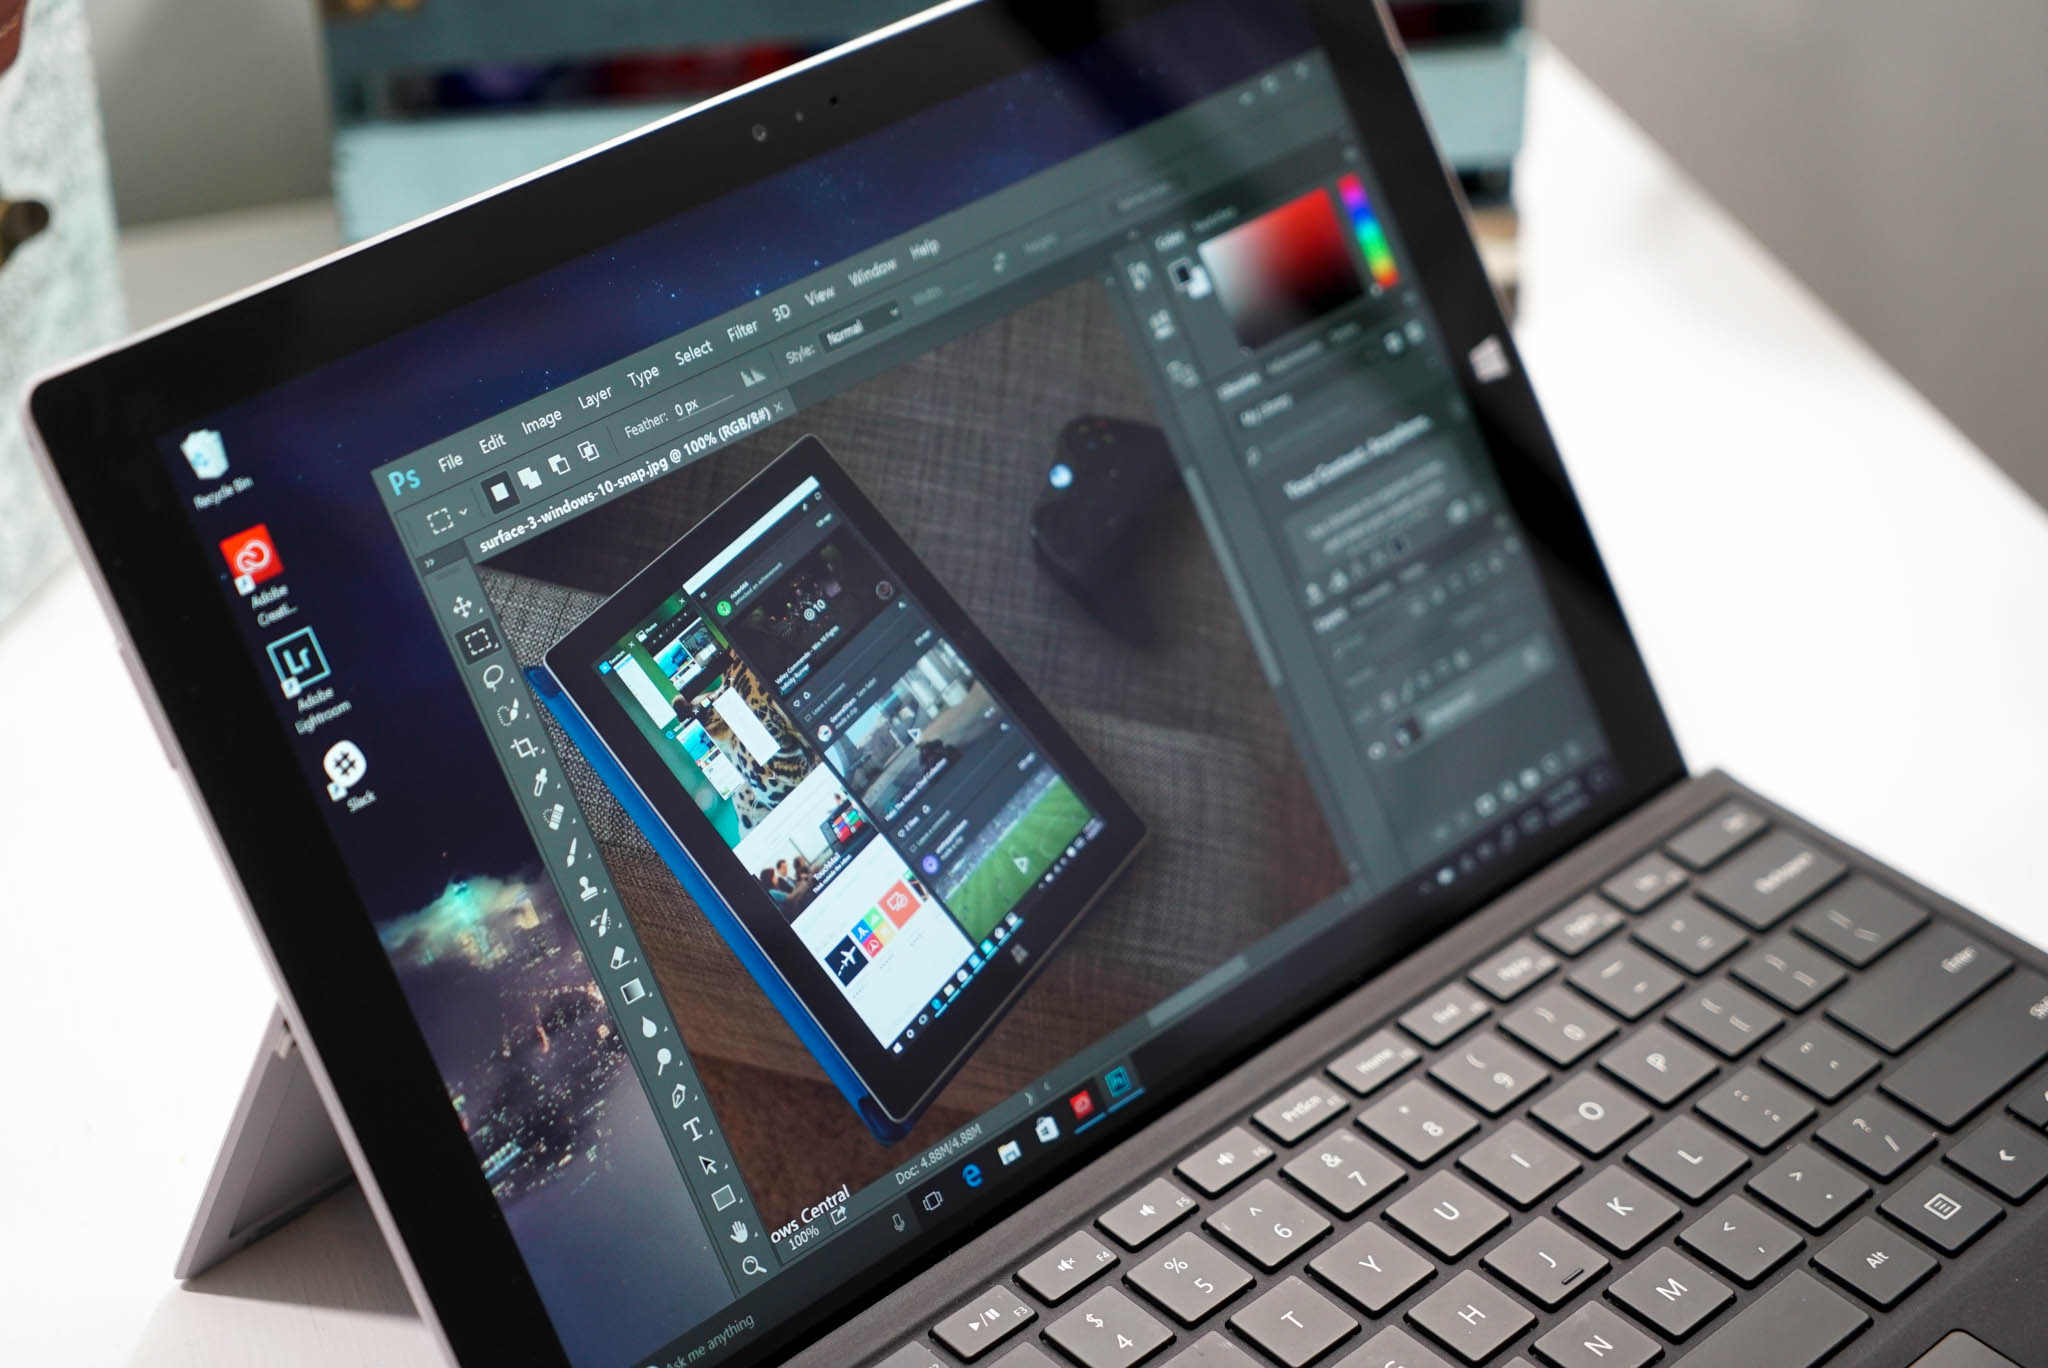 Adobe releases Photoshop beta app for Windows 10 on ARM devices